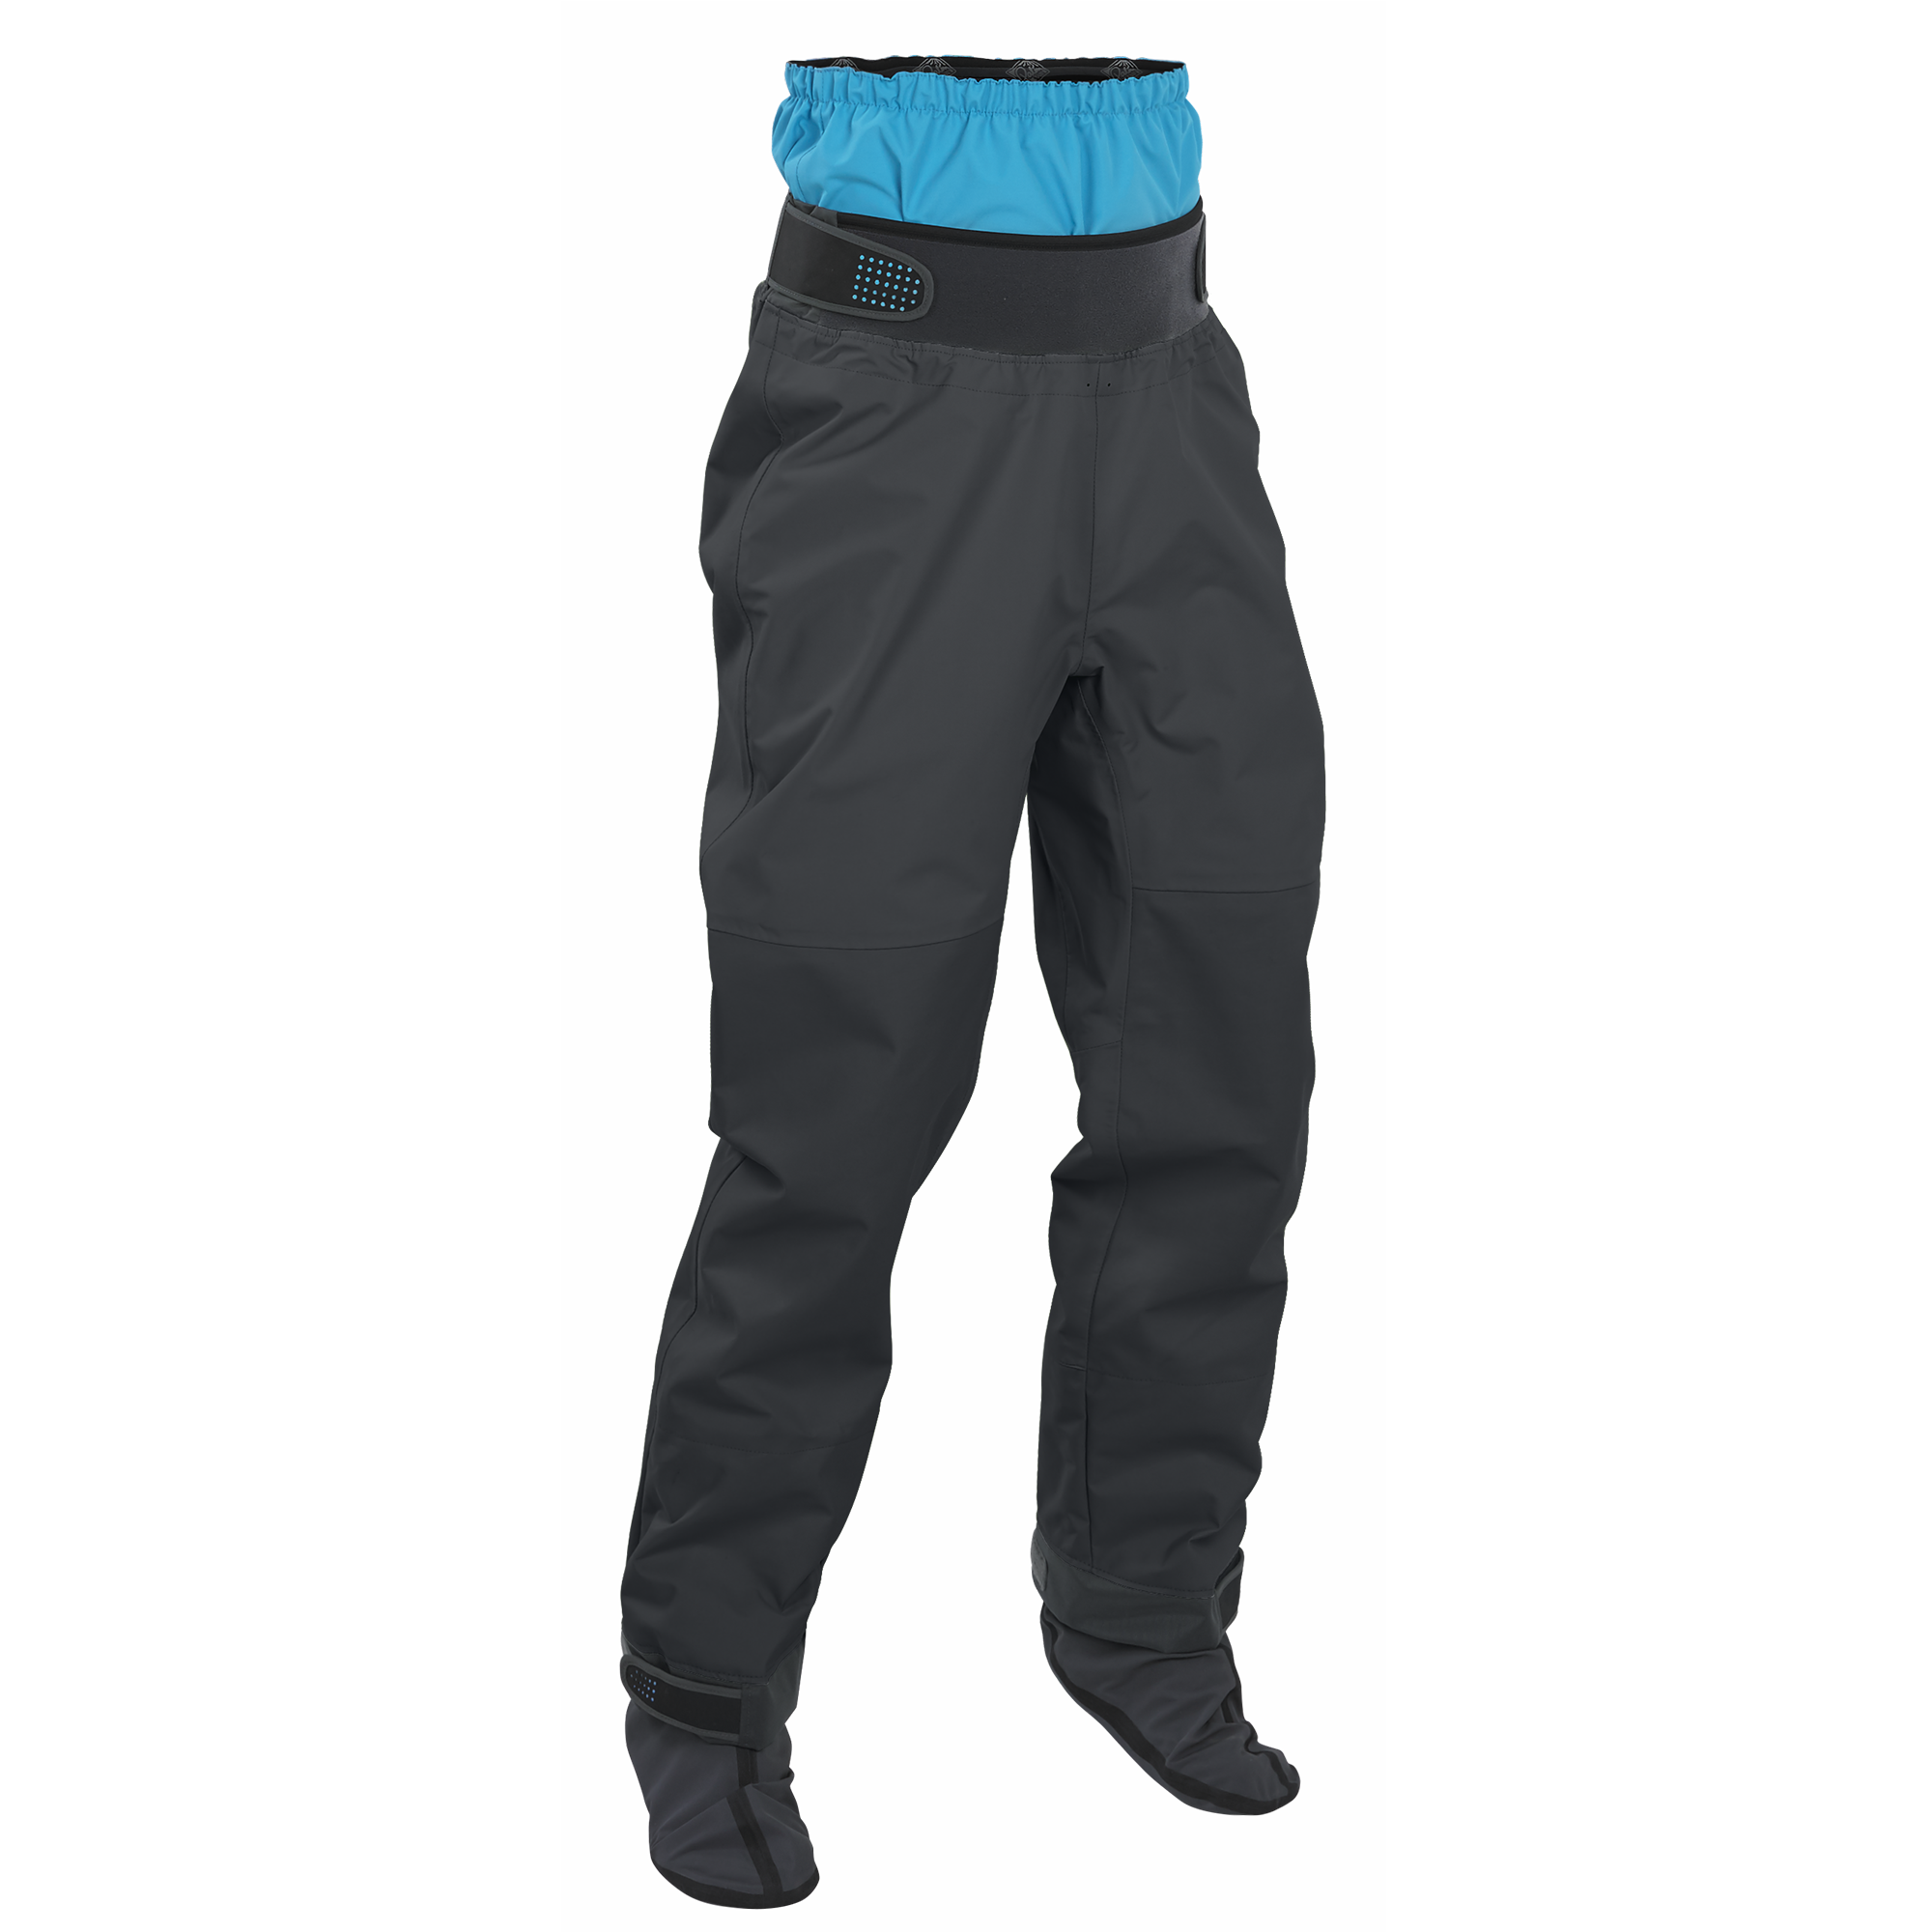 Palm Atom Pants - Dry trousers for kayaking and canoeing